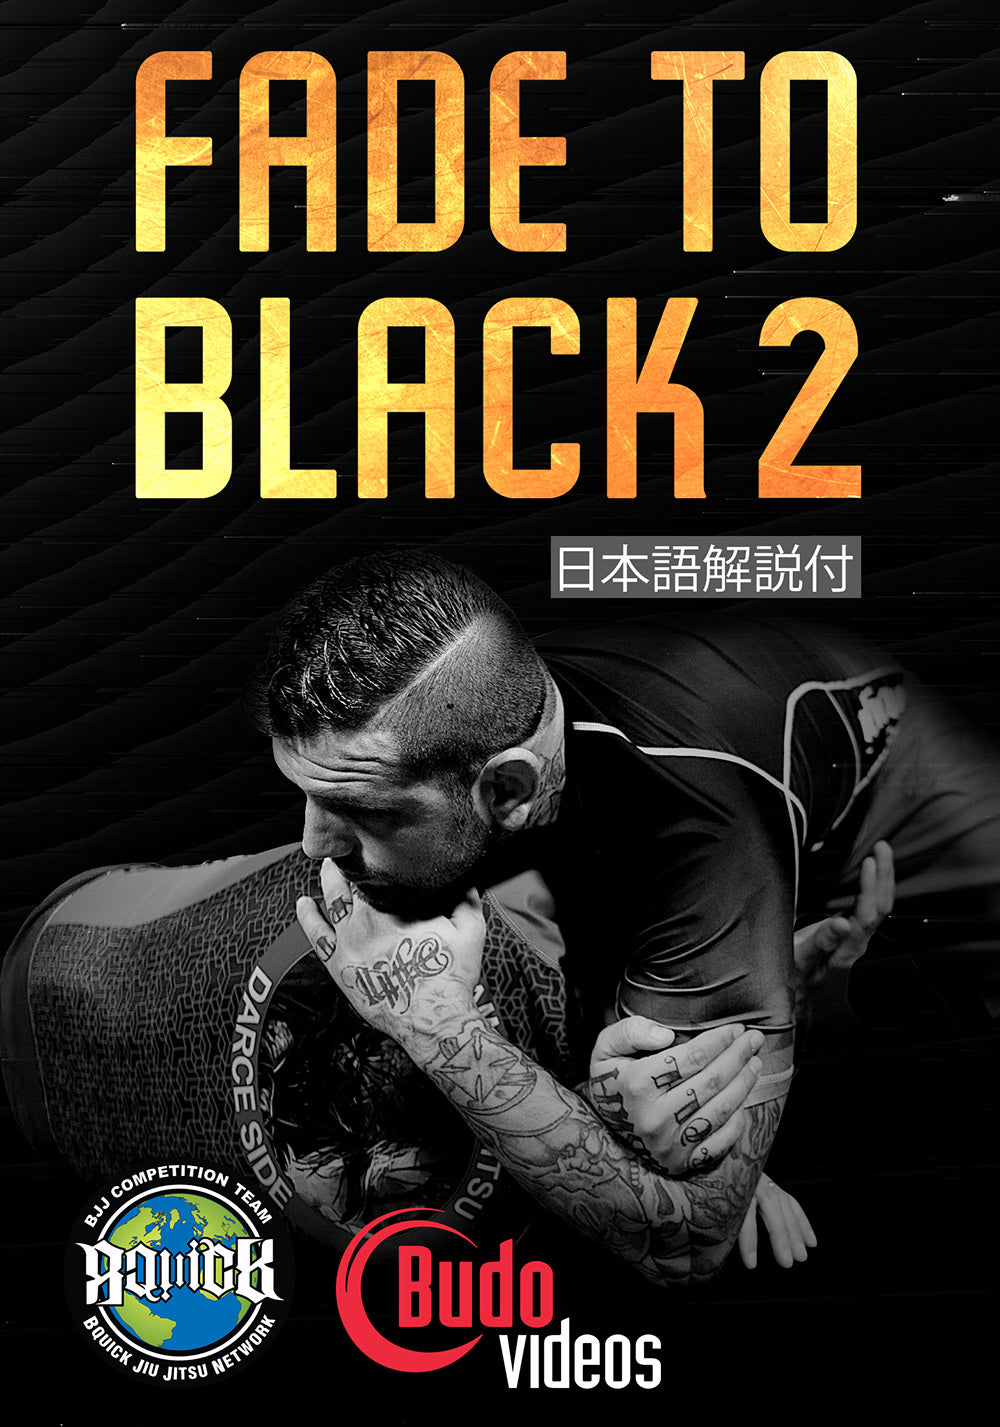 Fade to Black 2 (5 Volume DVD or Blu-ray Set) with Brandon Quick - Budovideos Inc